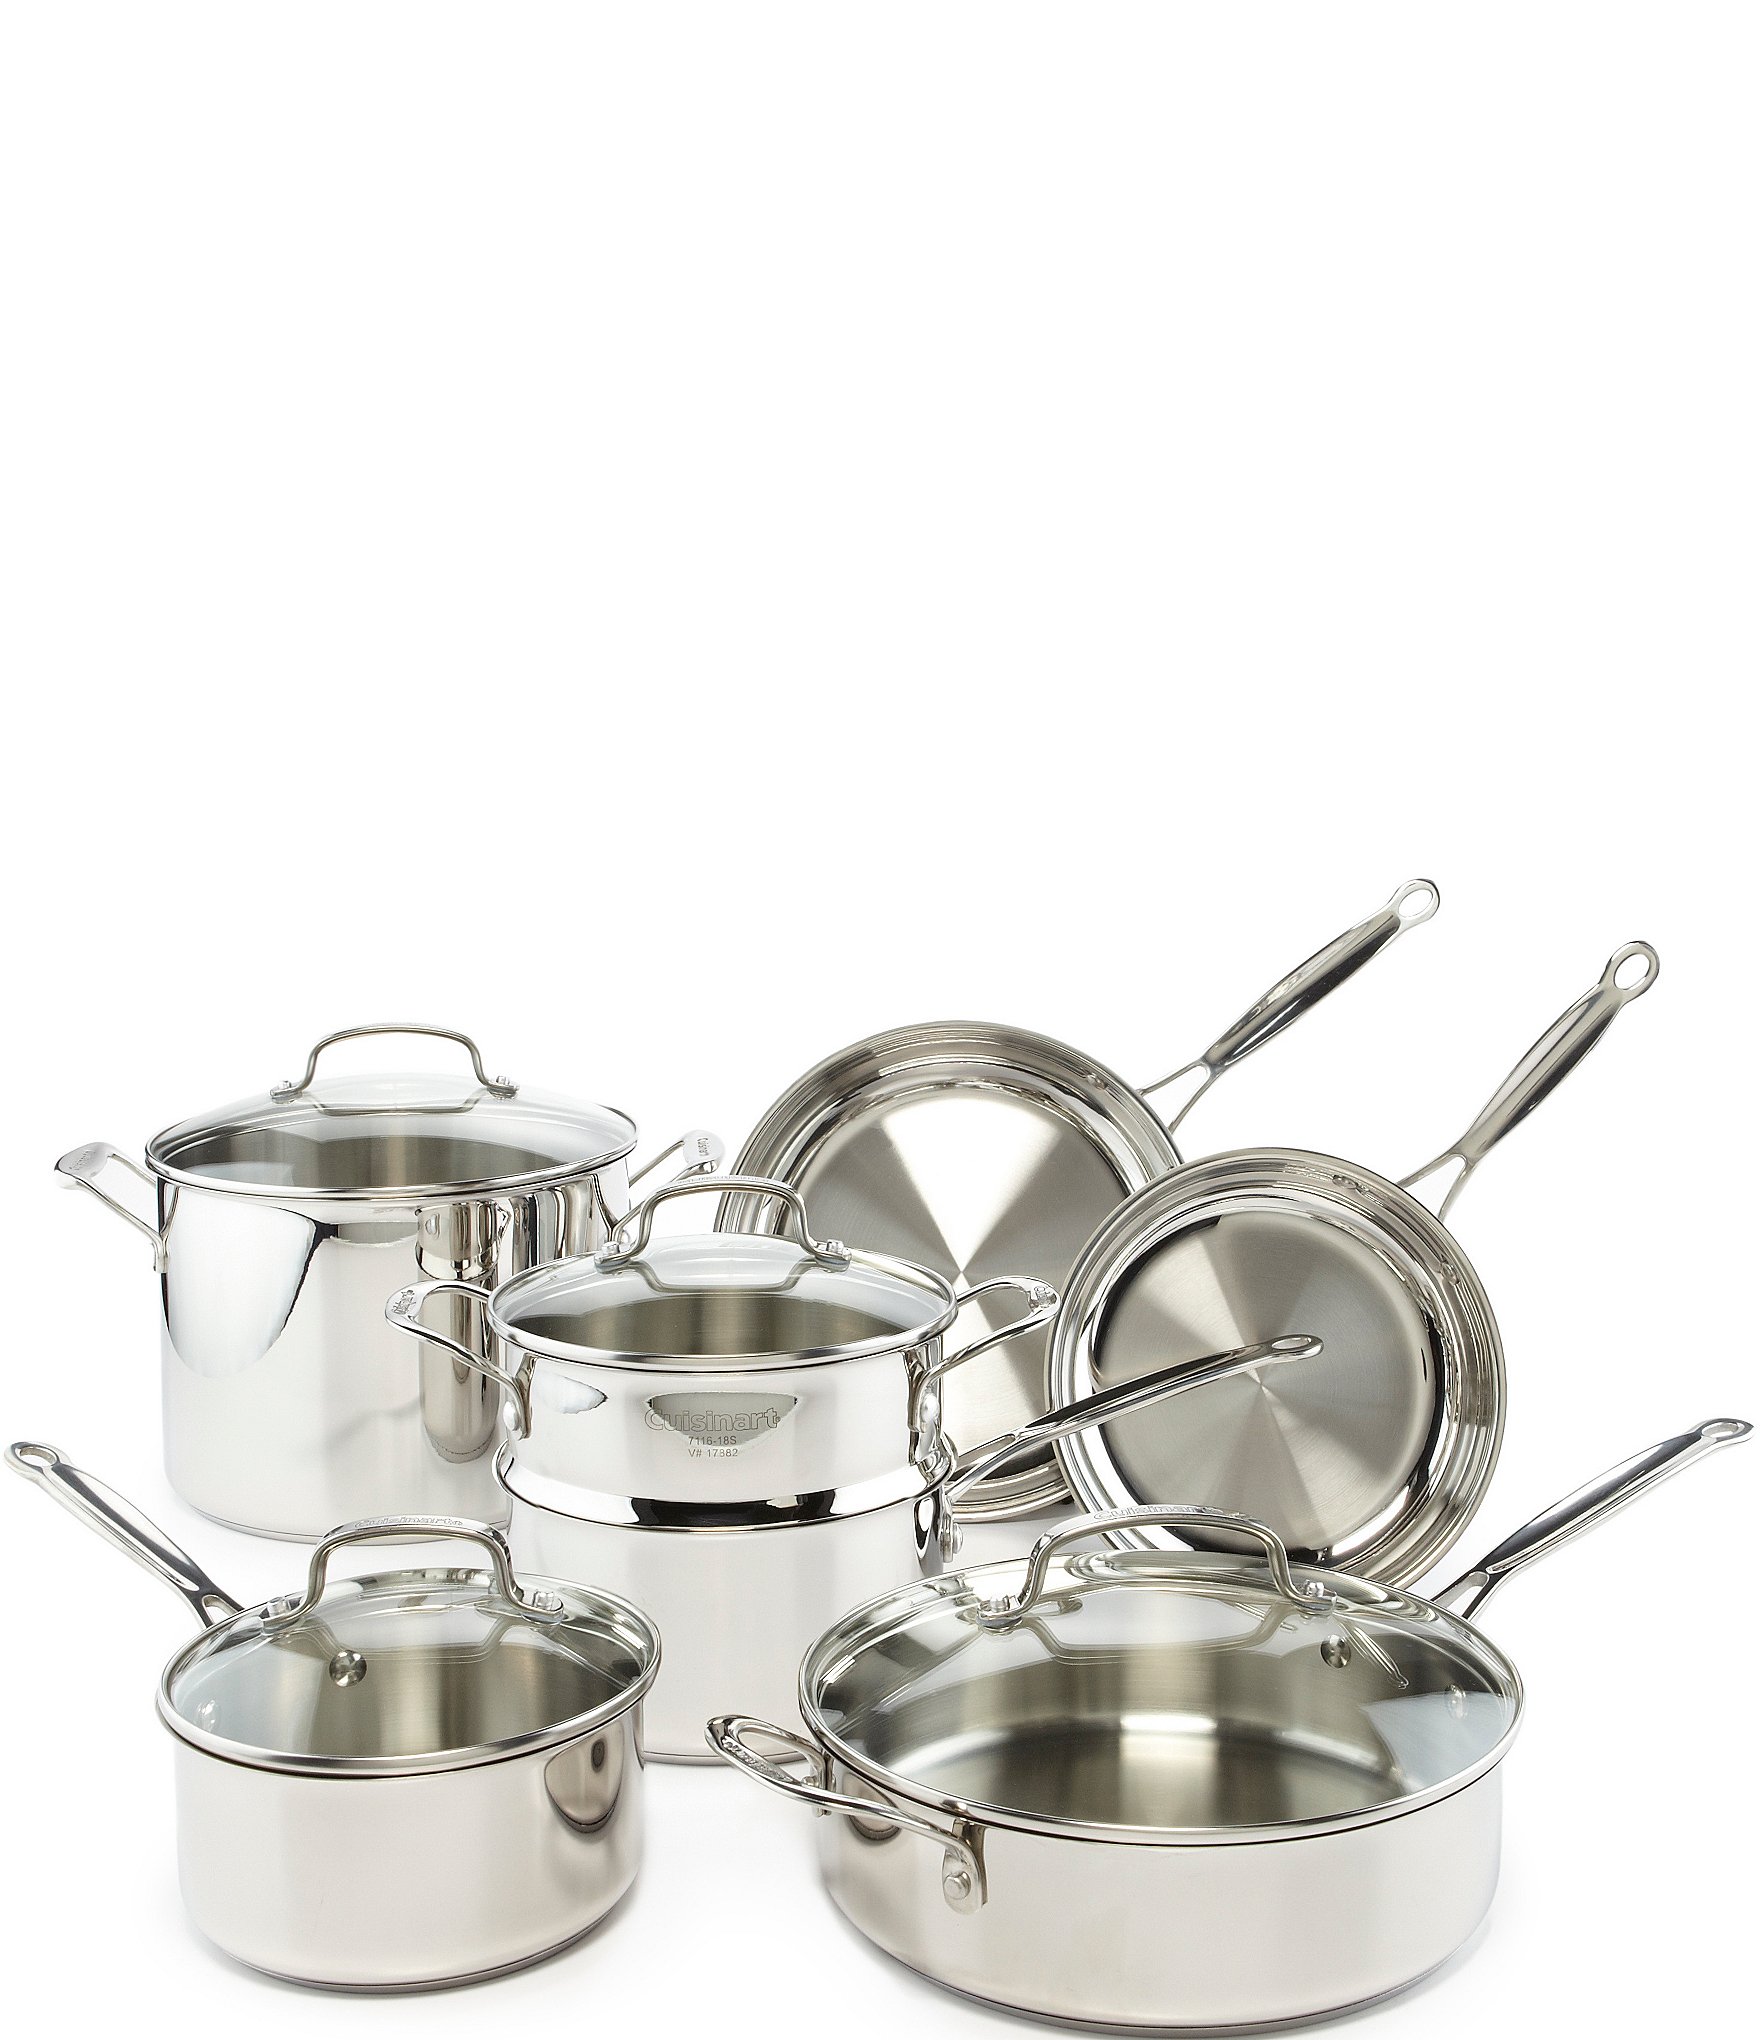 Cuisinart Chef's Classic Stainless Steel 11-Piece Cookware Set | Dillards Cuisinart Chef's Classic Stainless Steel 11-piece Cookware Set